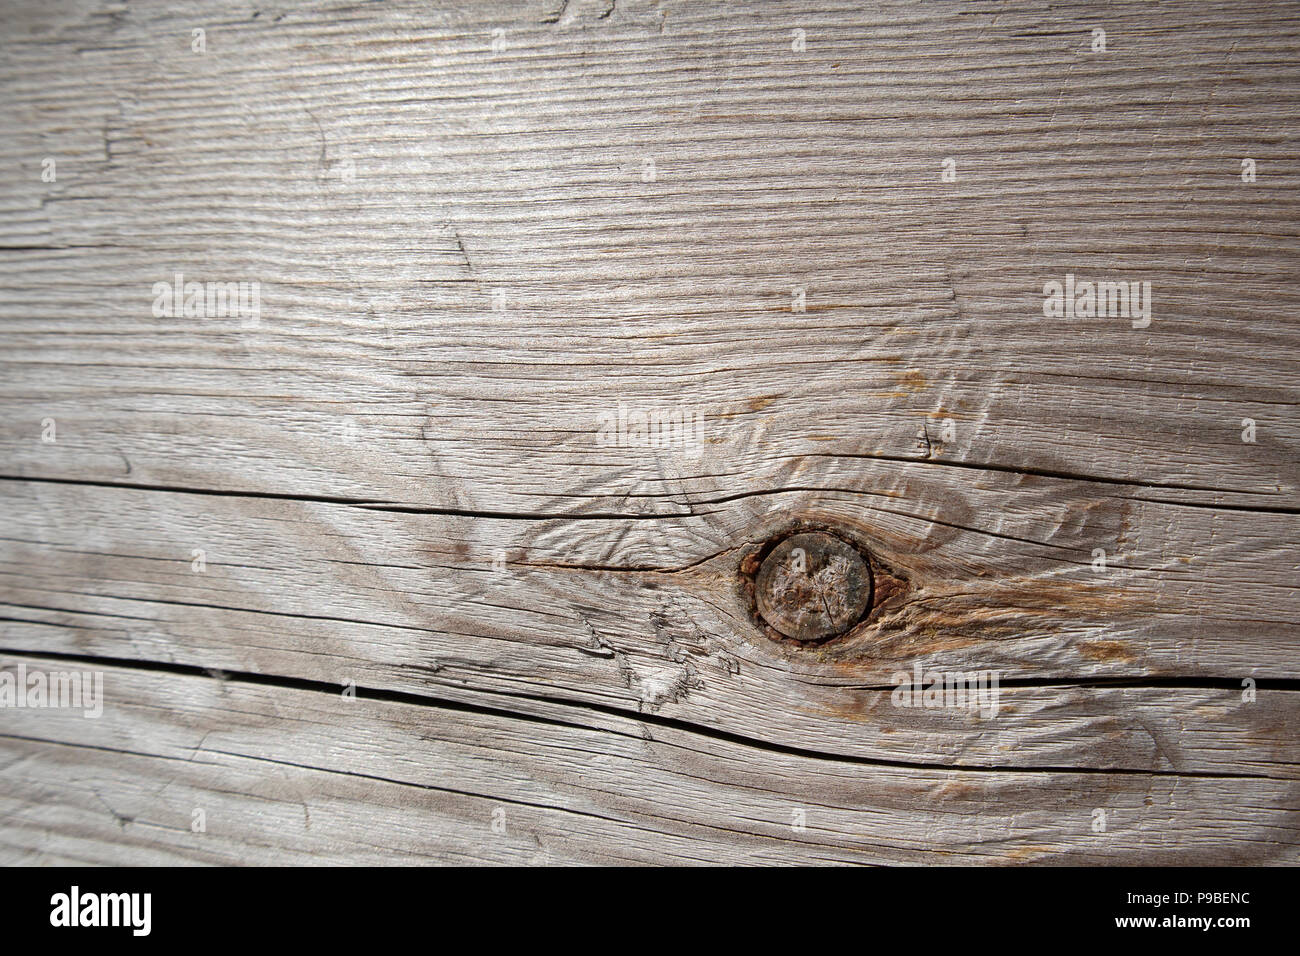 Old wooden planed board surface with knot and big cracks, may be used as background Stock Photo